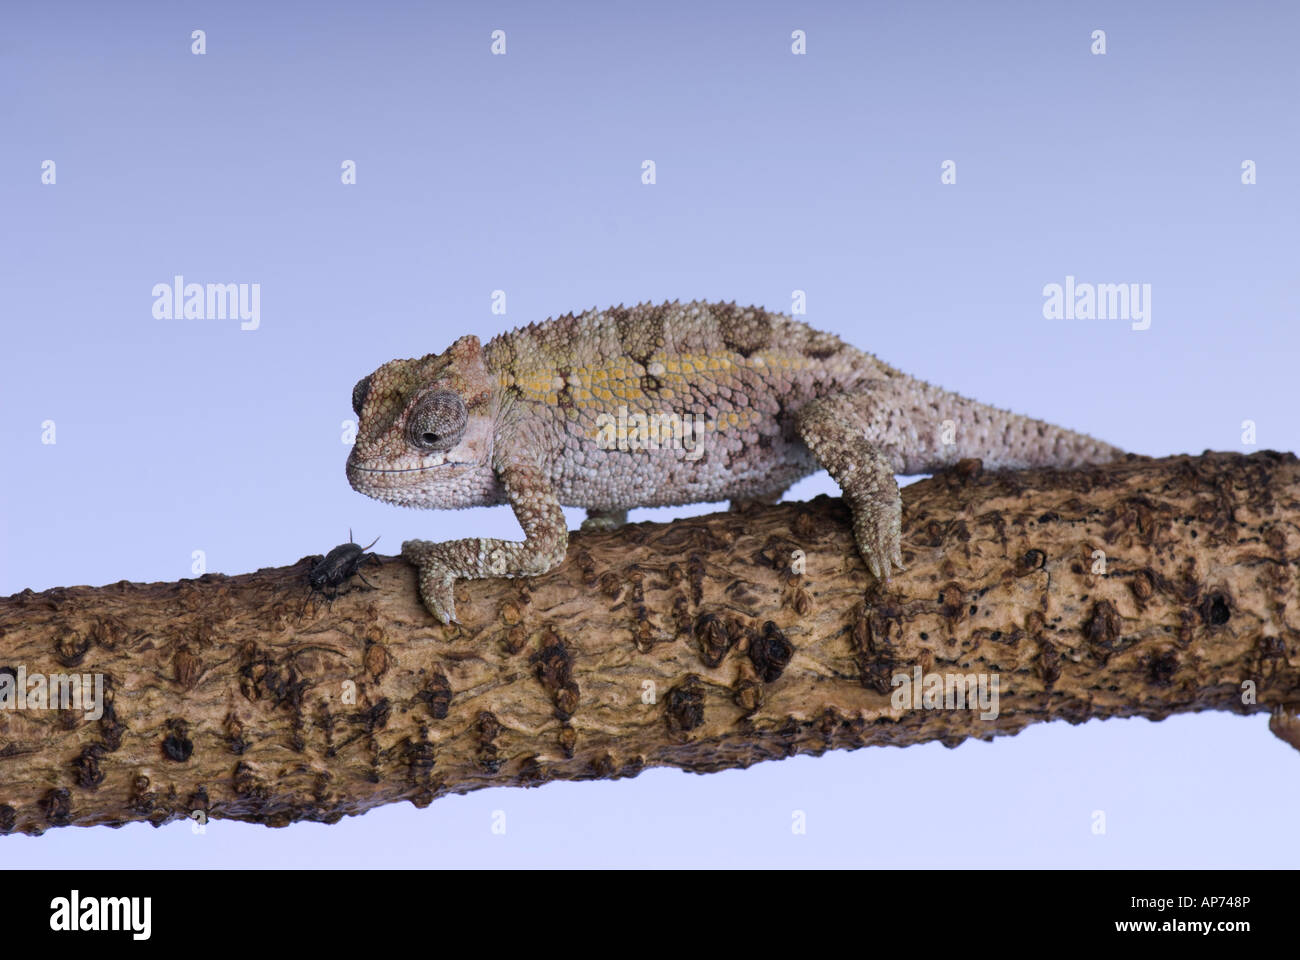 Small chameleon looking at cricket on branch Stock Photo